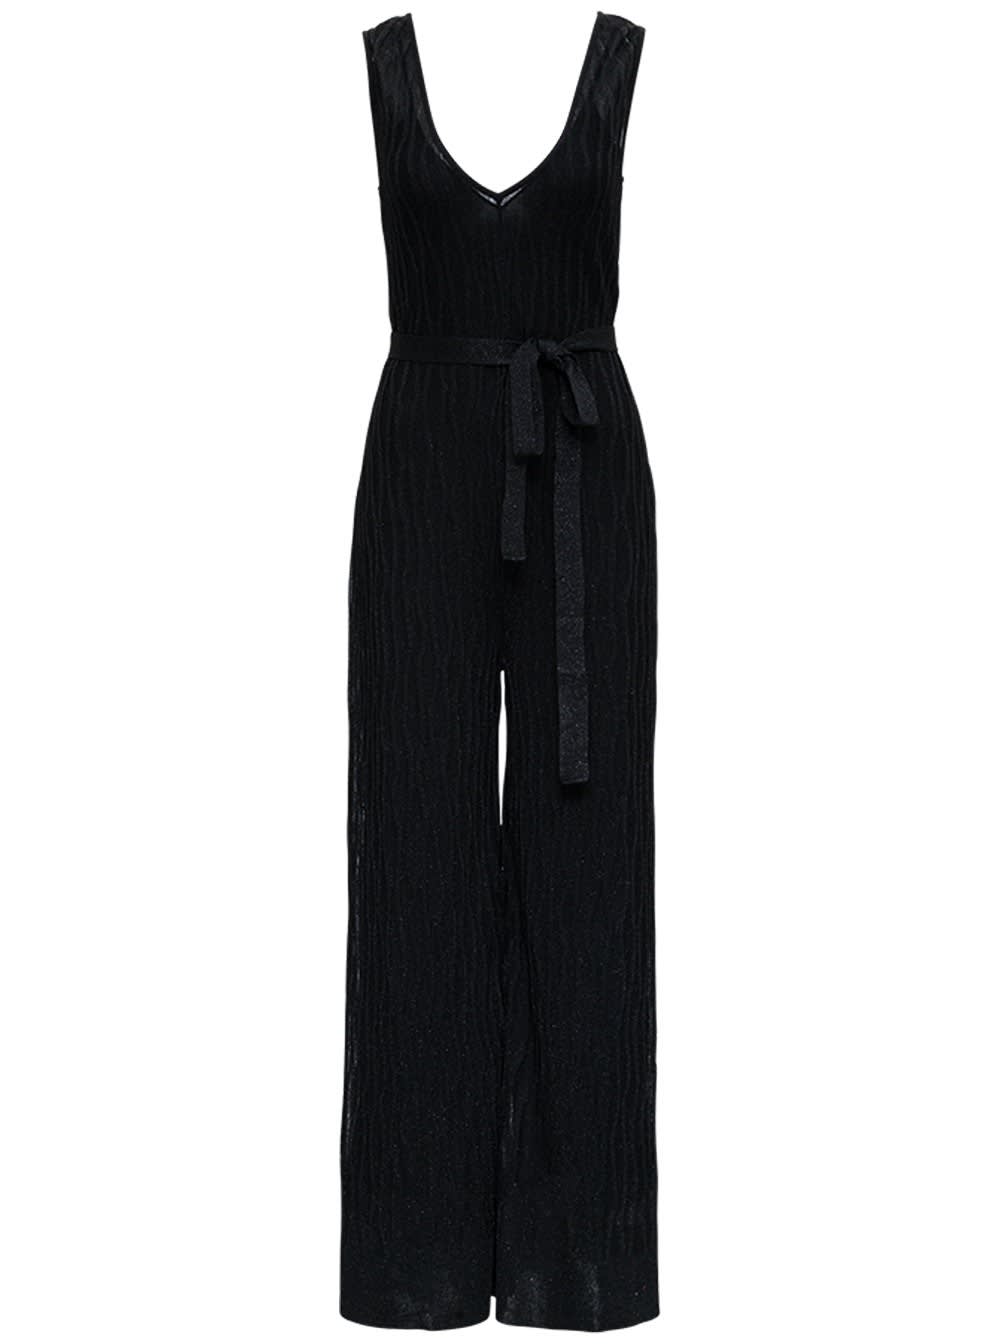 M Missoni Black Jumpsuit In Rayon Blend With Belt